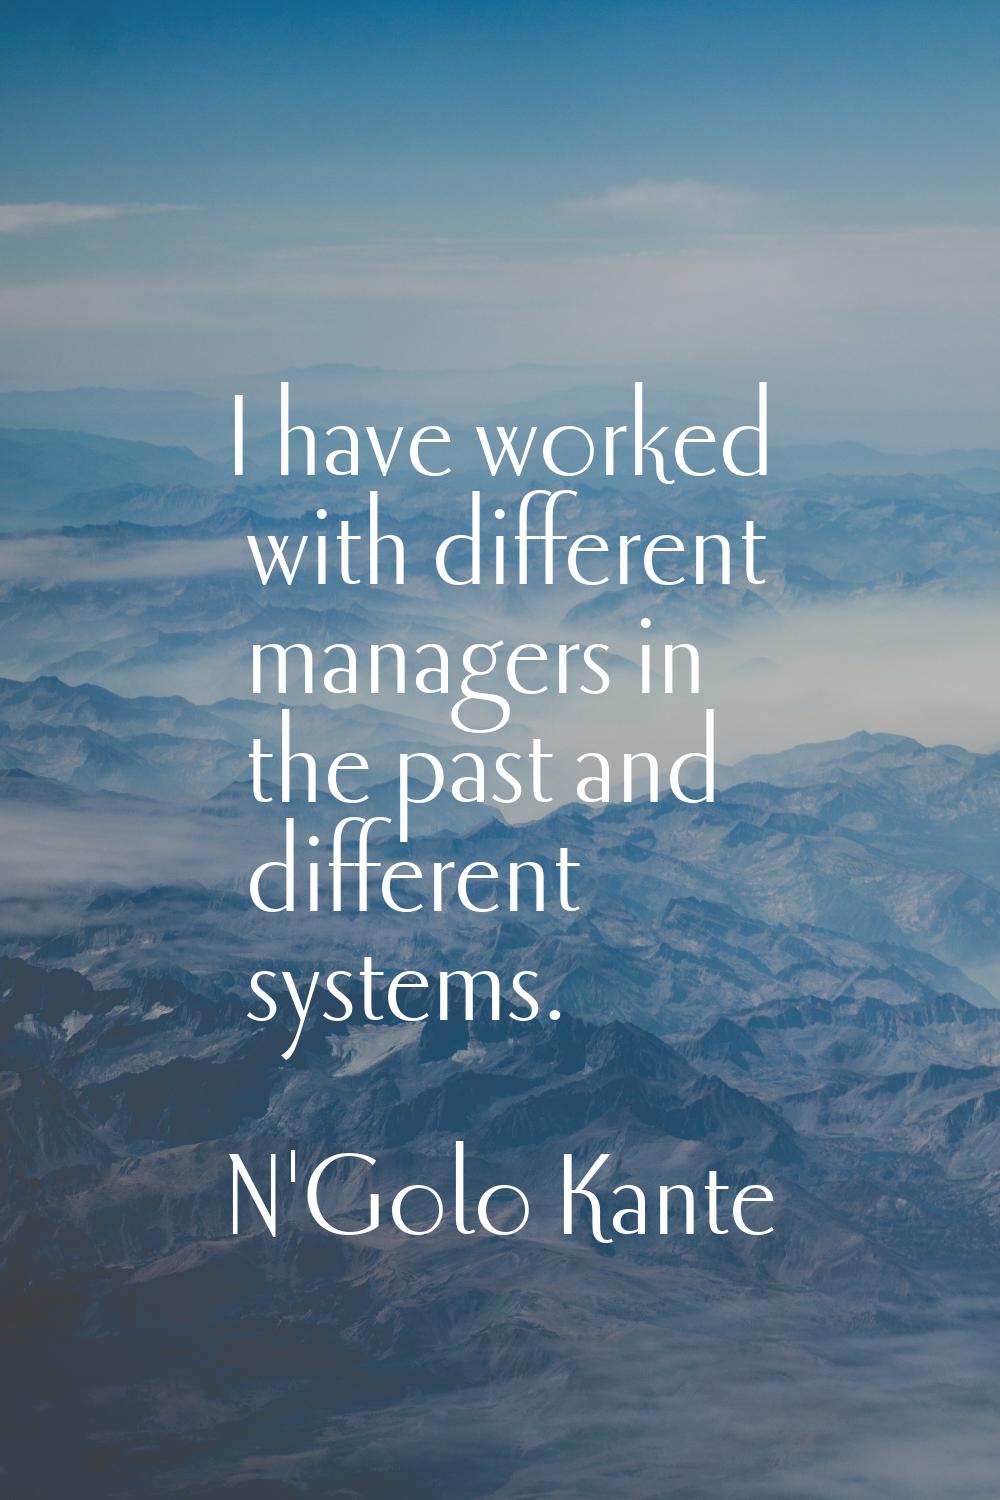 I have worked with different managers in the past and different systems.